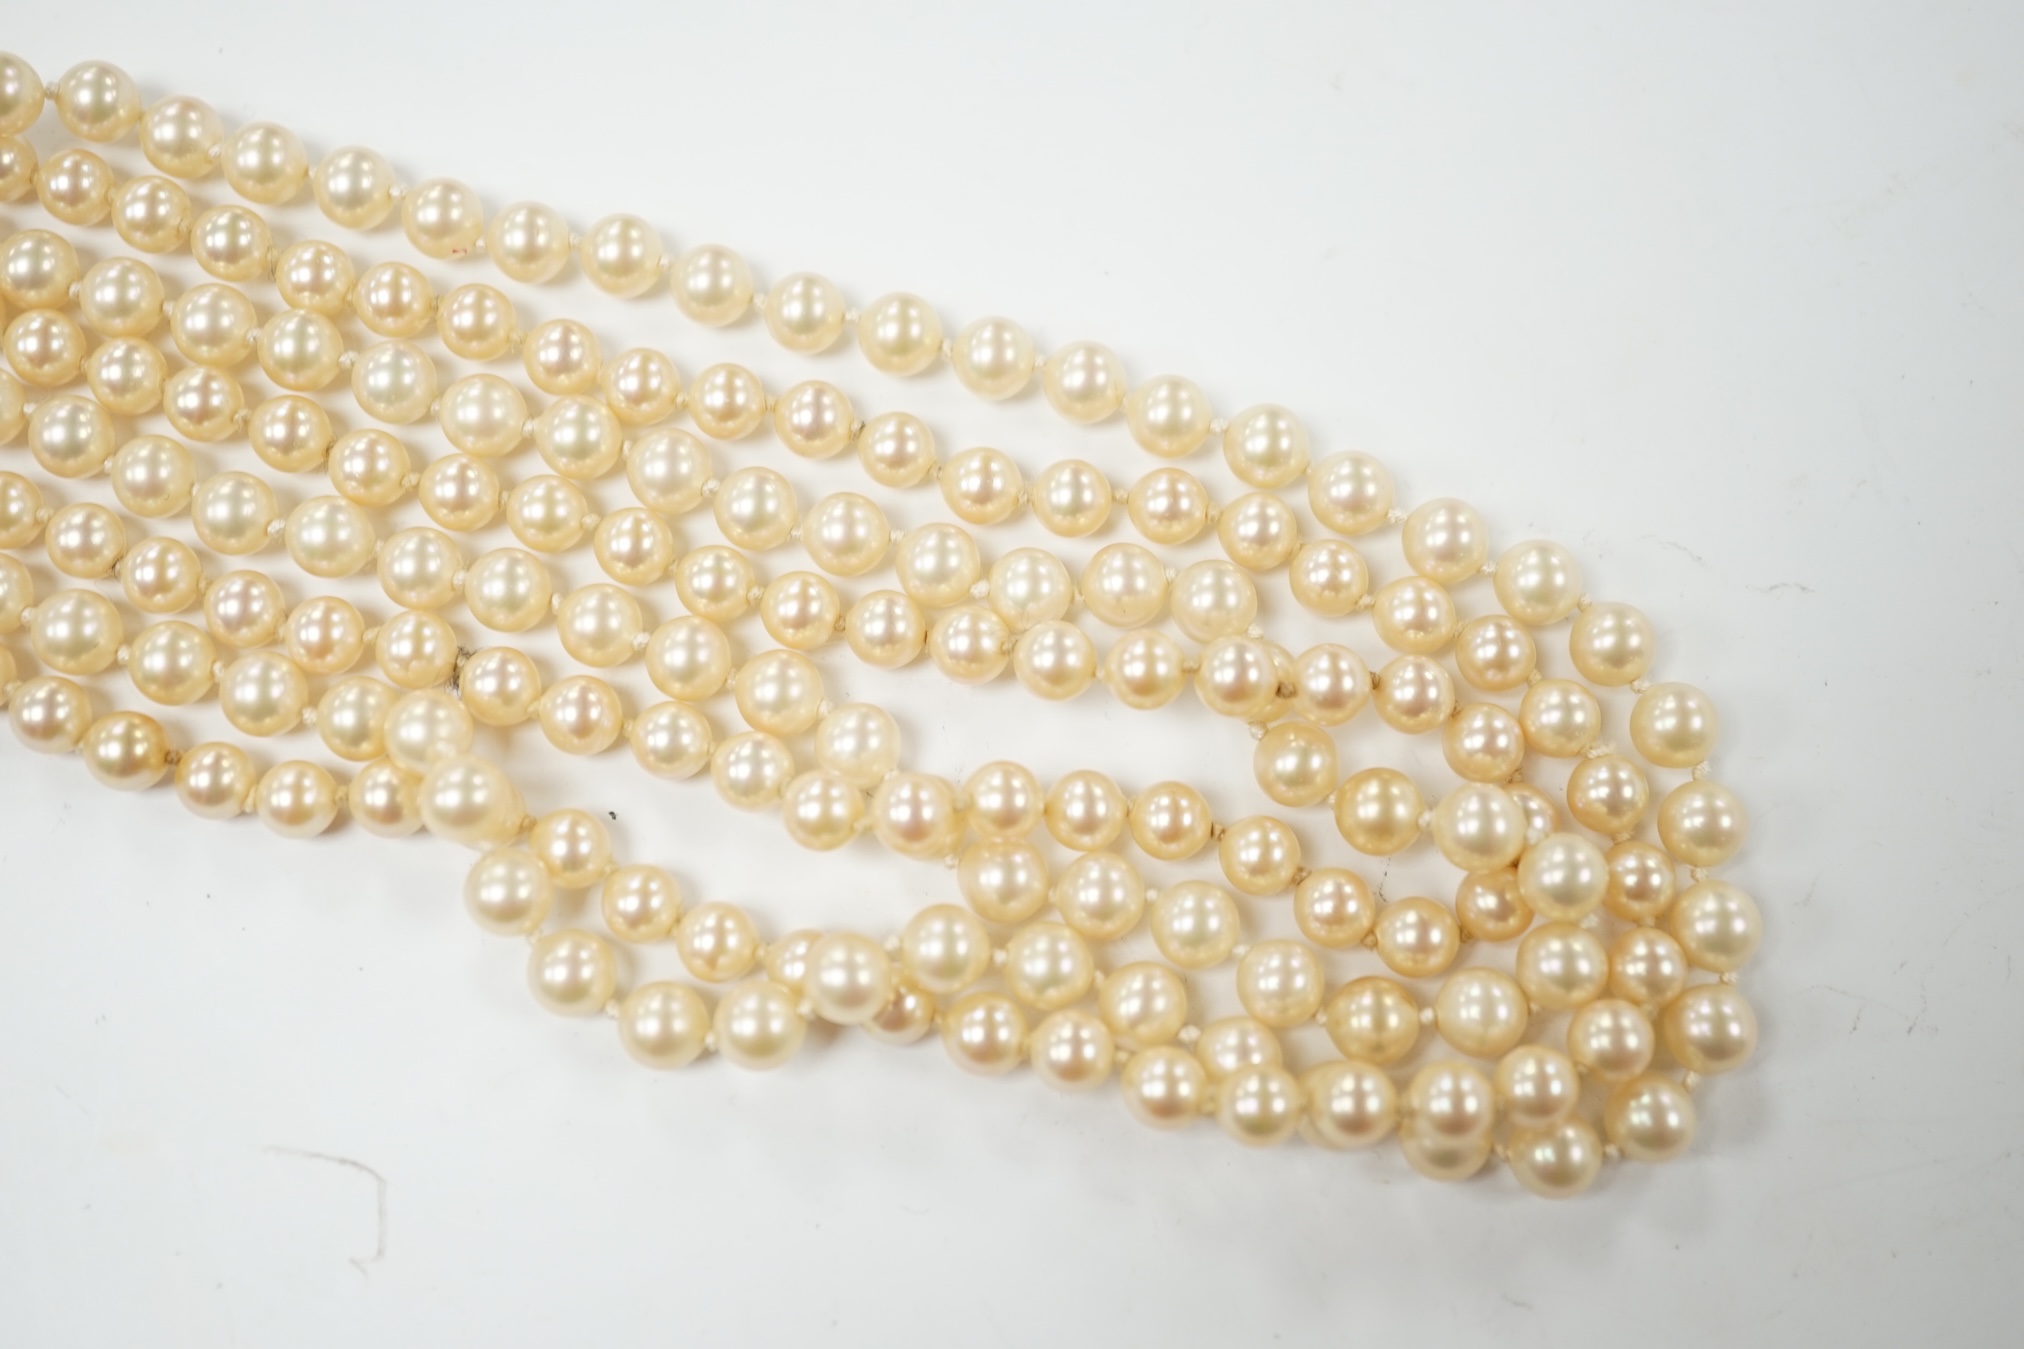 A double strand simulated pearl necklace, with diamond cluster set white metal clasp, 90cm. Condition - fair